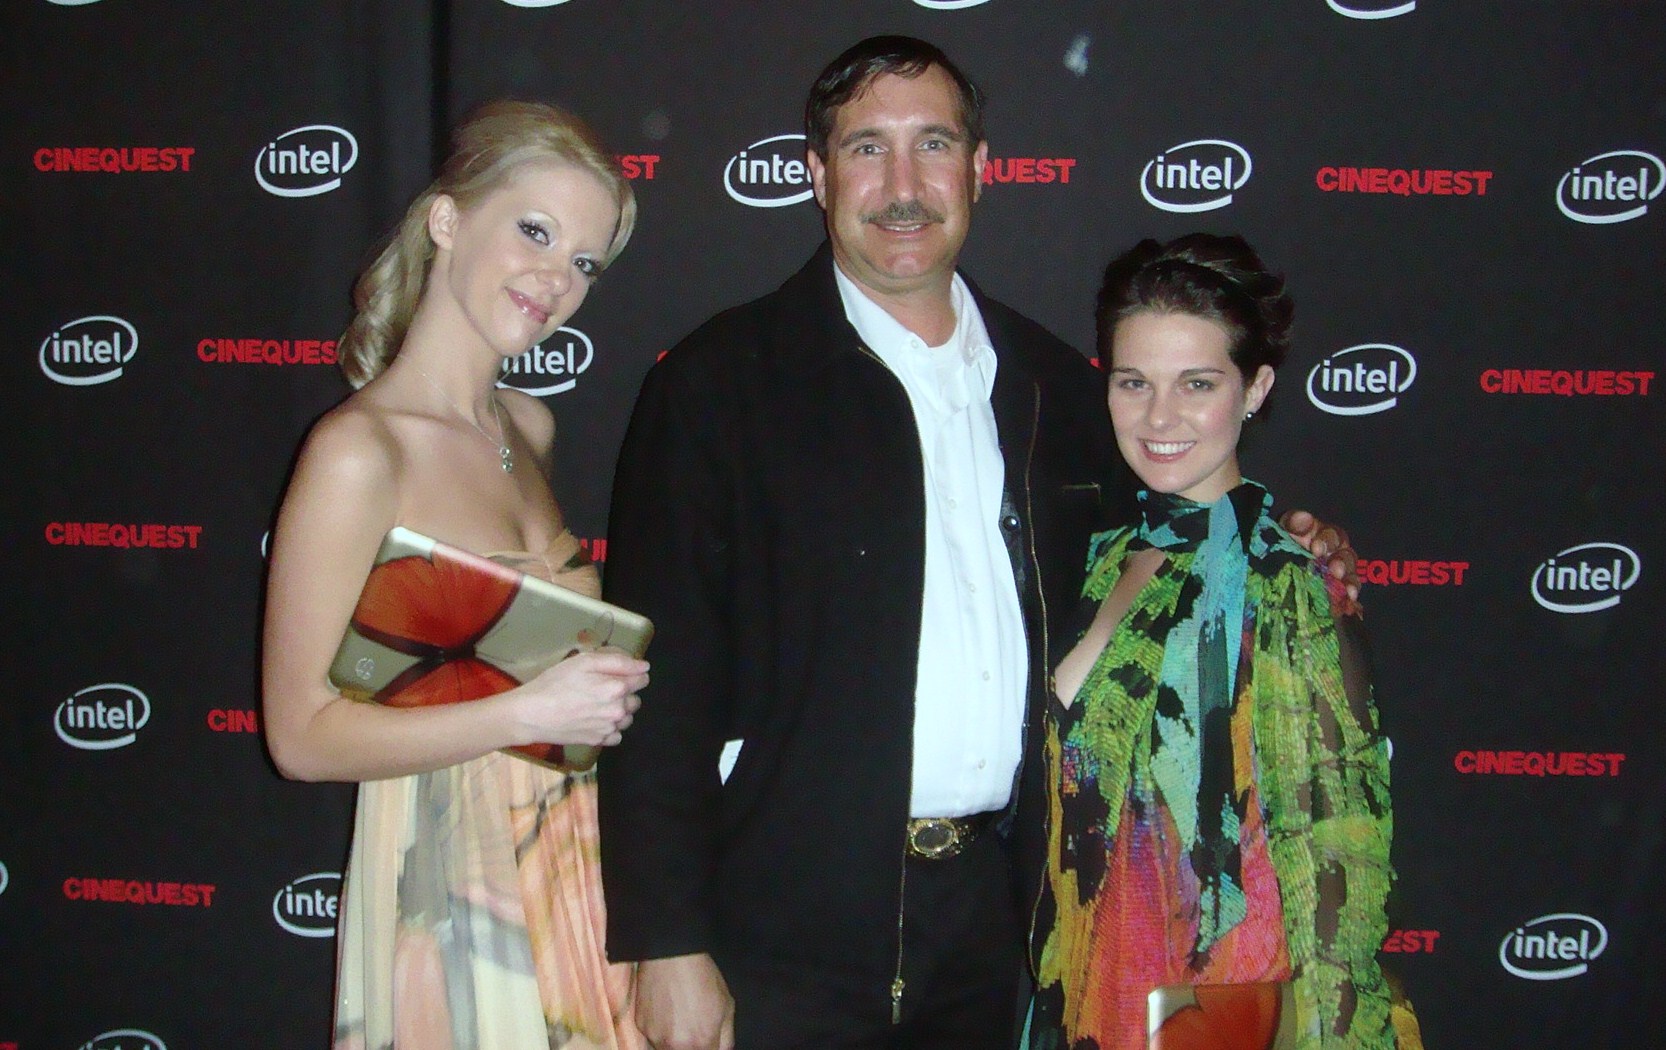 Al pictured with the HP Models opening night at the 2010 San Jose CINEQUEST Film Festival -- 20th Anniversary Celebration.